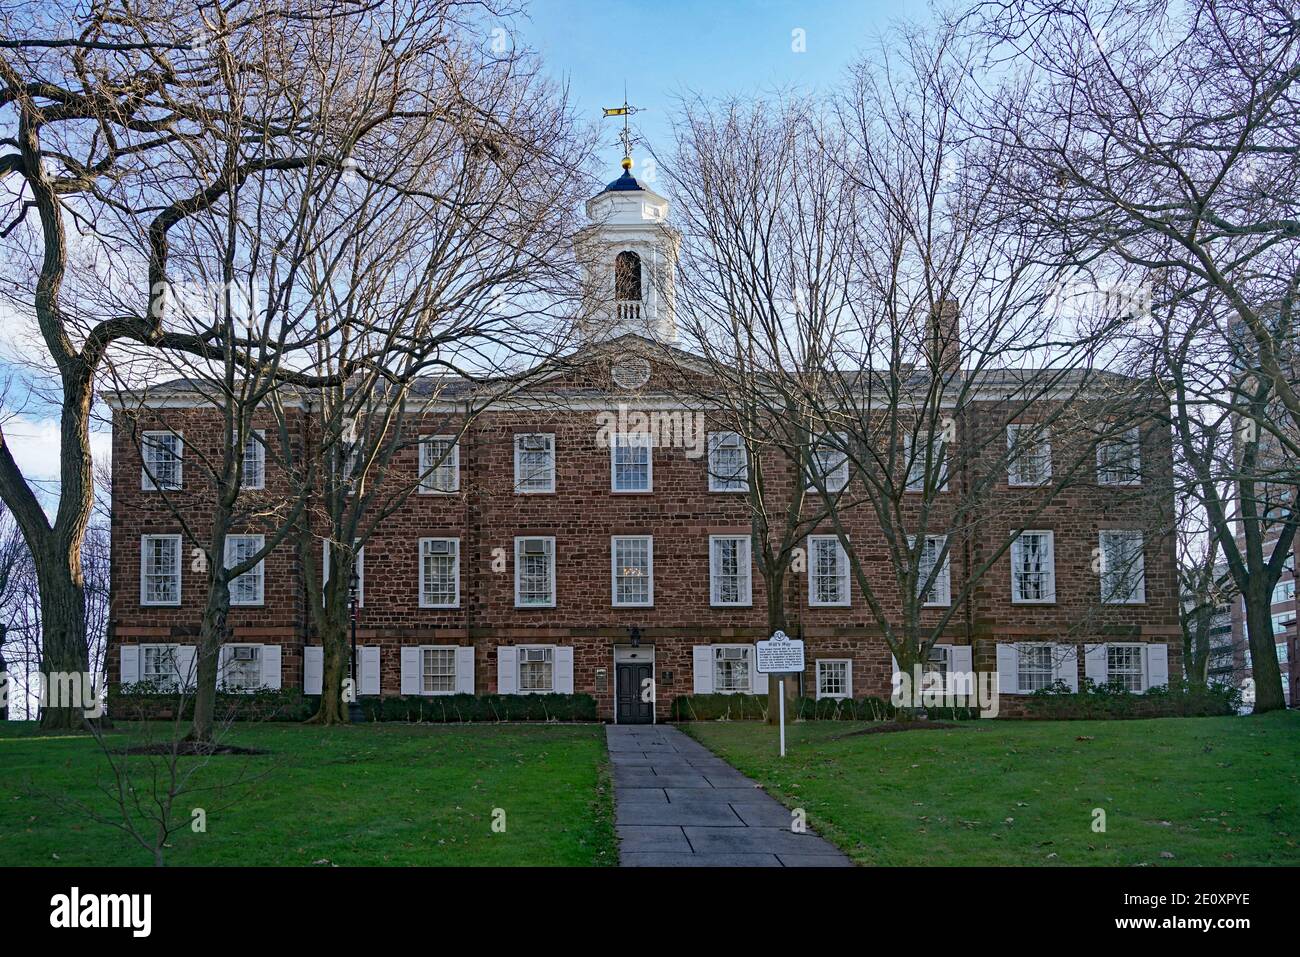 New Brunswick, NJ, USA - December 27, 2020: Queen's College, started in  1808, the oldest building on the Rutgers University campus Stock Photo -  Alamy